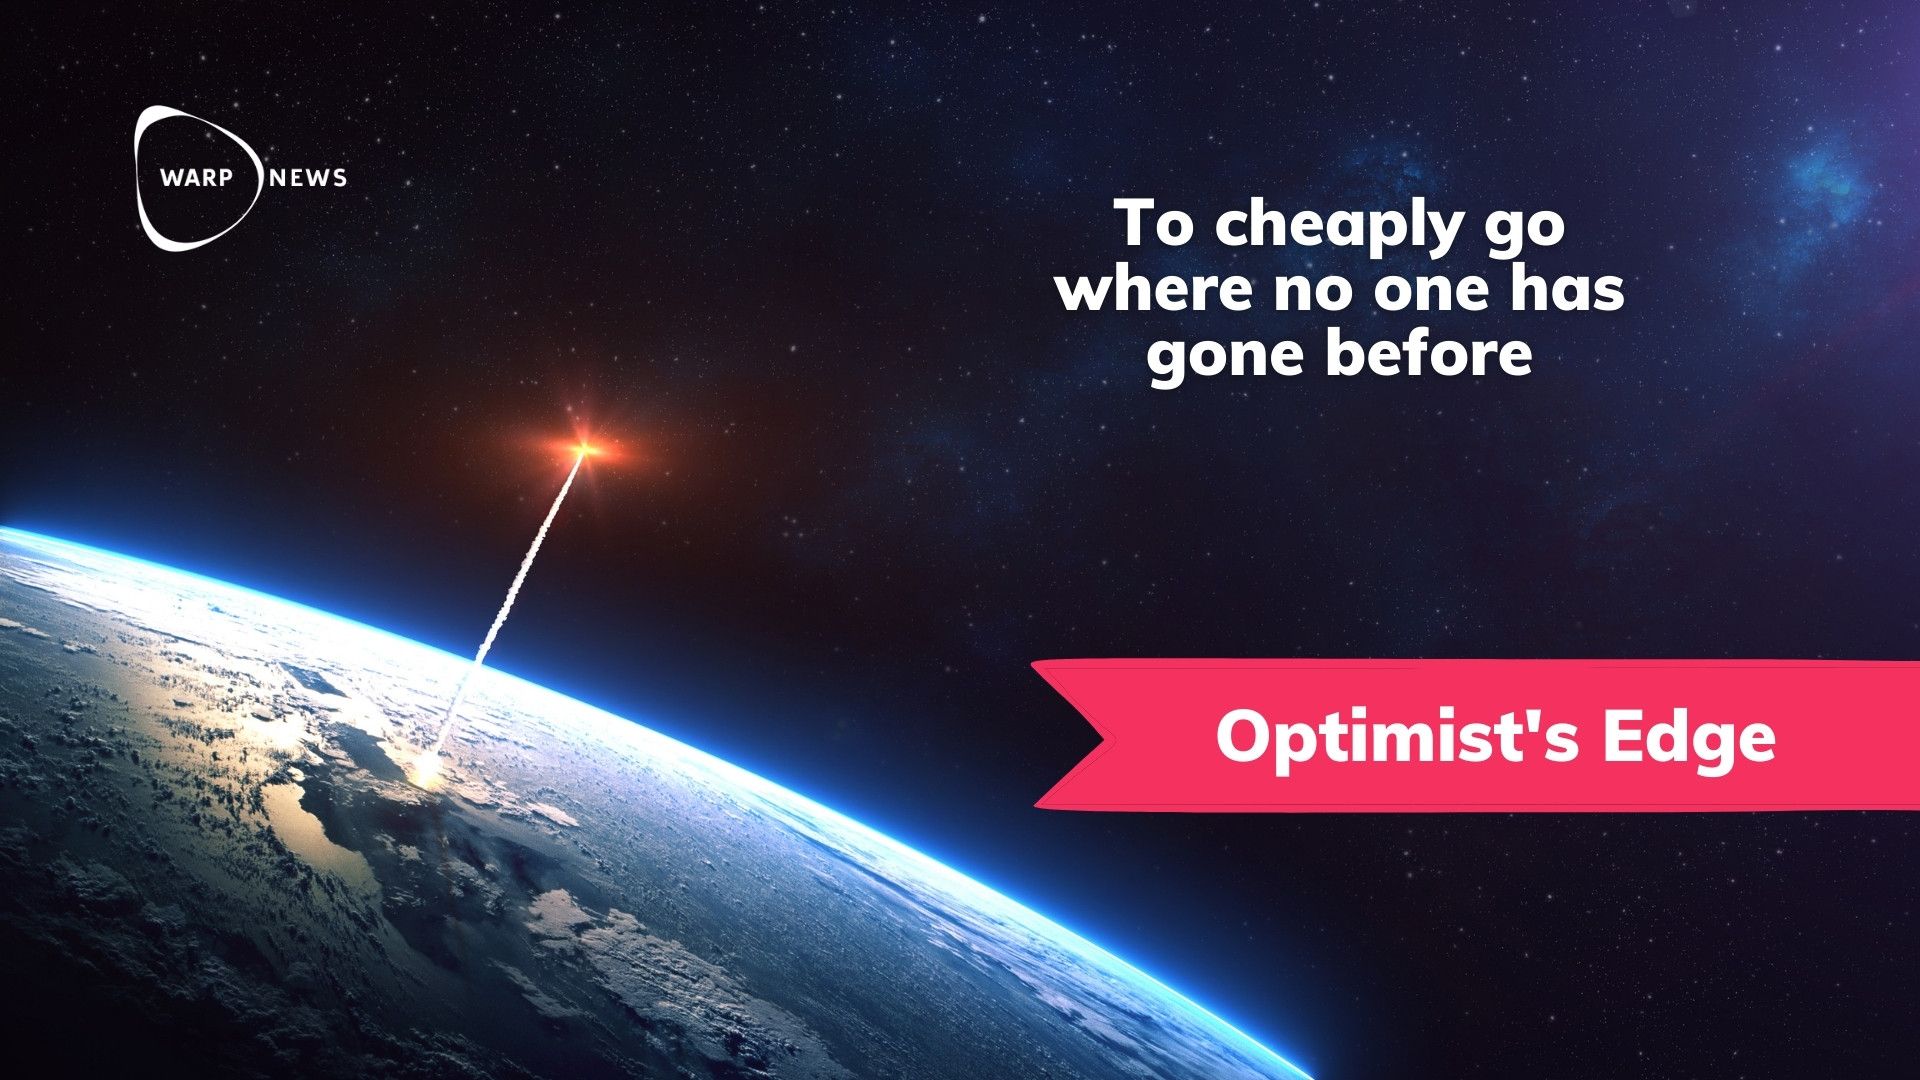 💡 Optimist's Edge: Launching into space will be 99.9% cheaper